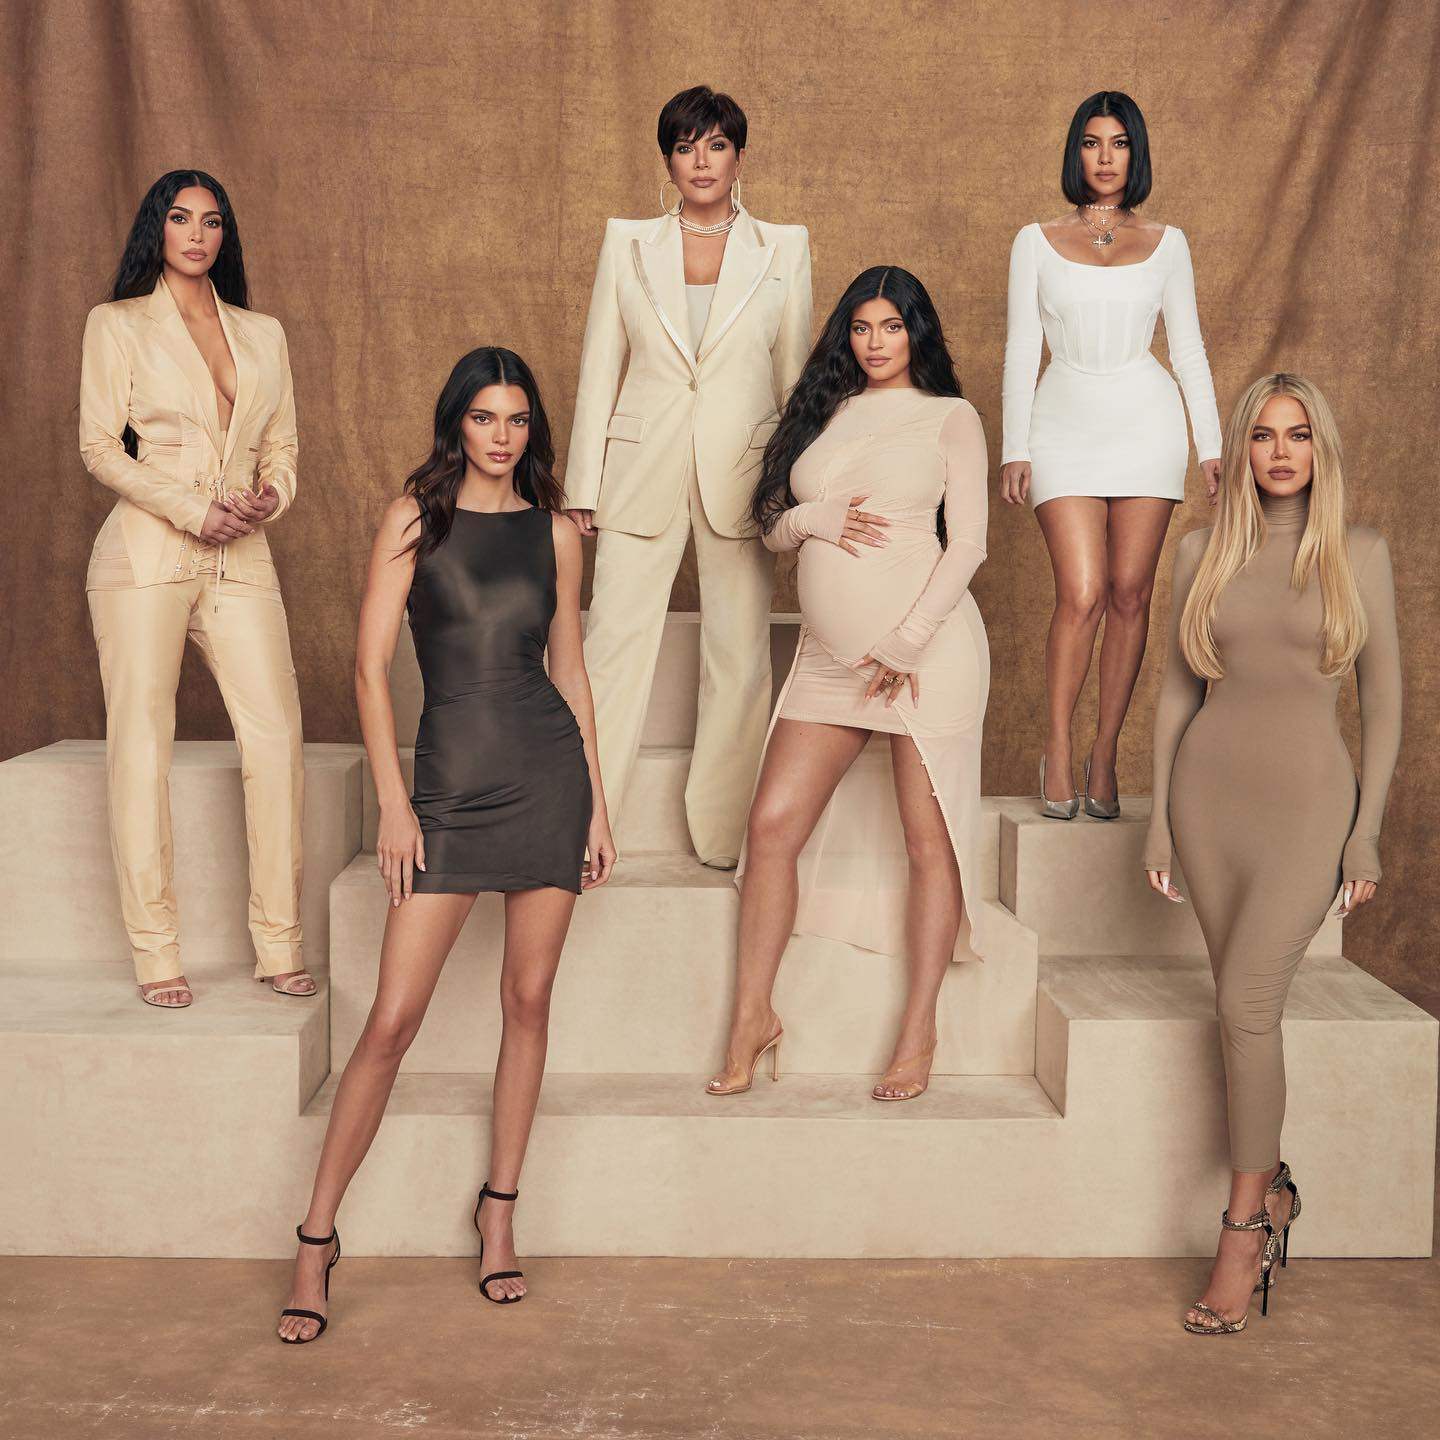 Kylie Jenner's Instagram Posts Are Worth Millions